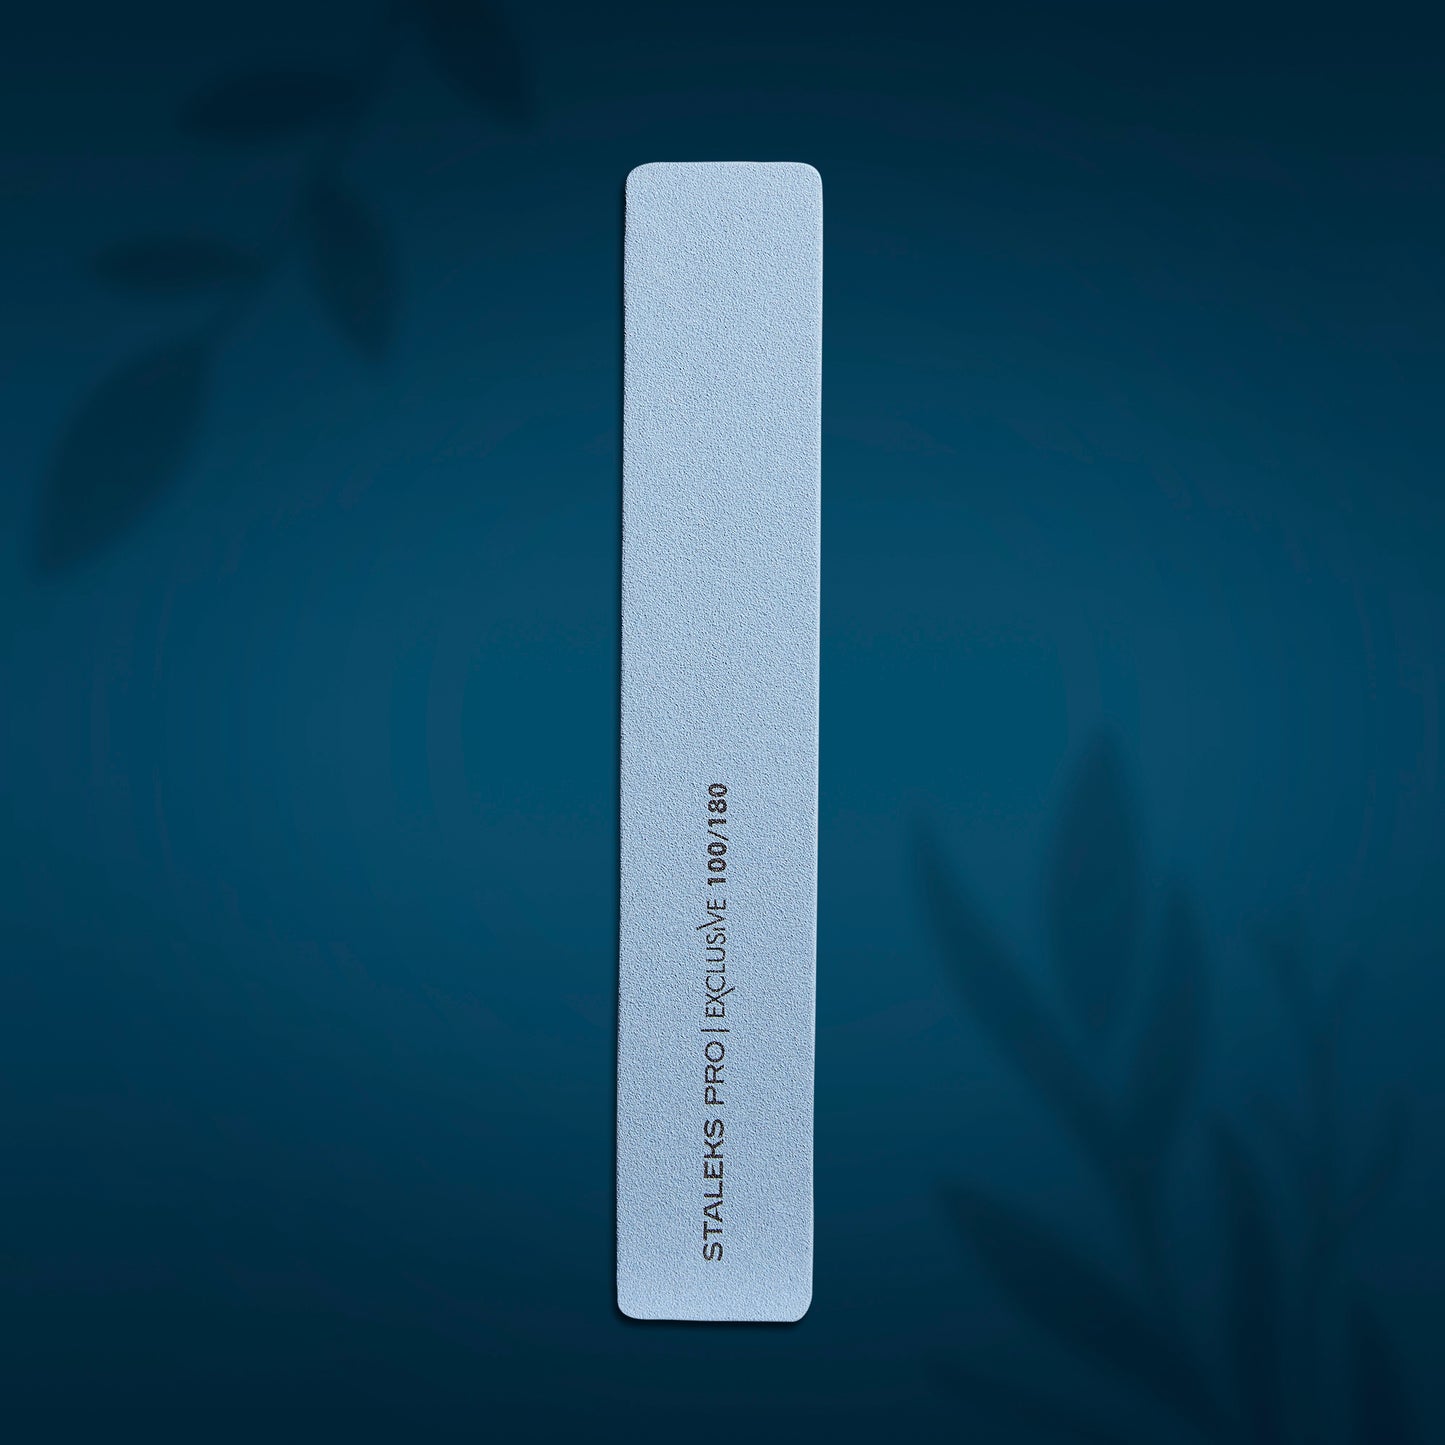 100/180grit Mineral straight nail file EXCLUSIVE